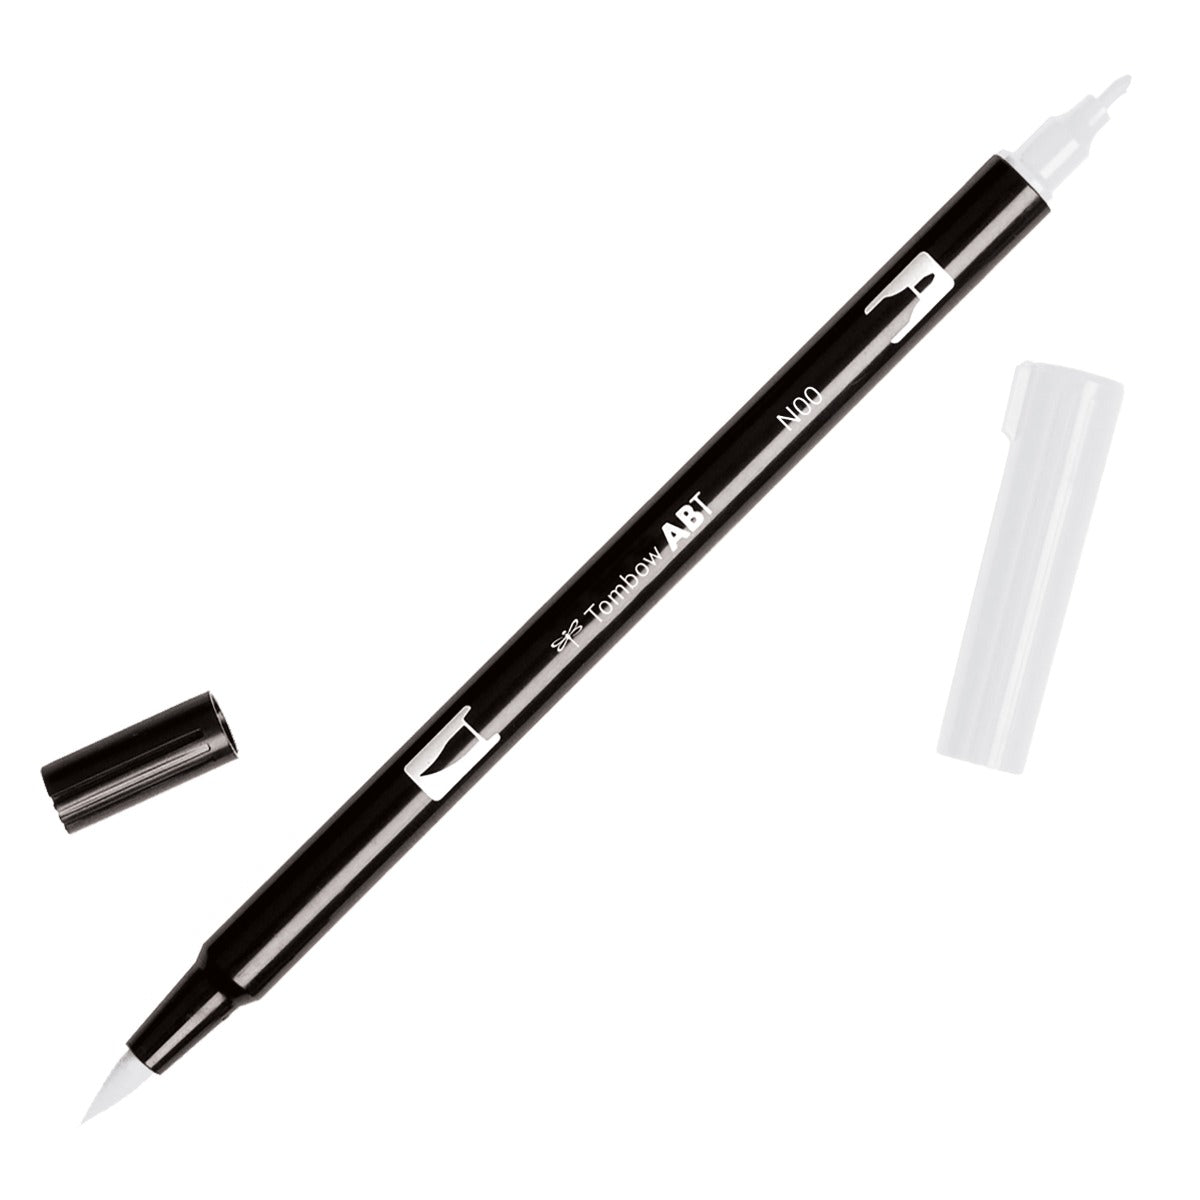 Flexible brush tip and fine tip in one marker. Brush tip works like a paintbrush to create fine, medium or bold strokes; fine tip gives consistent lines. Dual Brush Pens are ideal for artists and crafters.